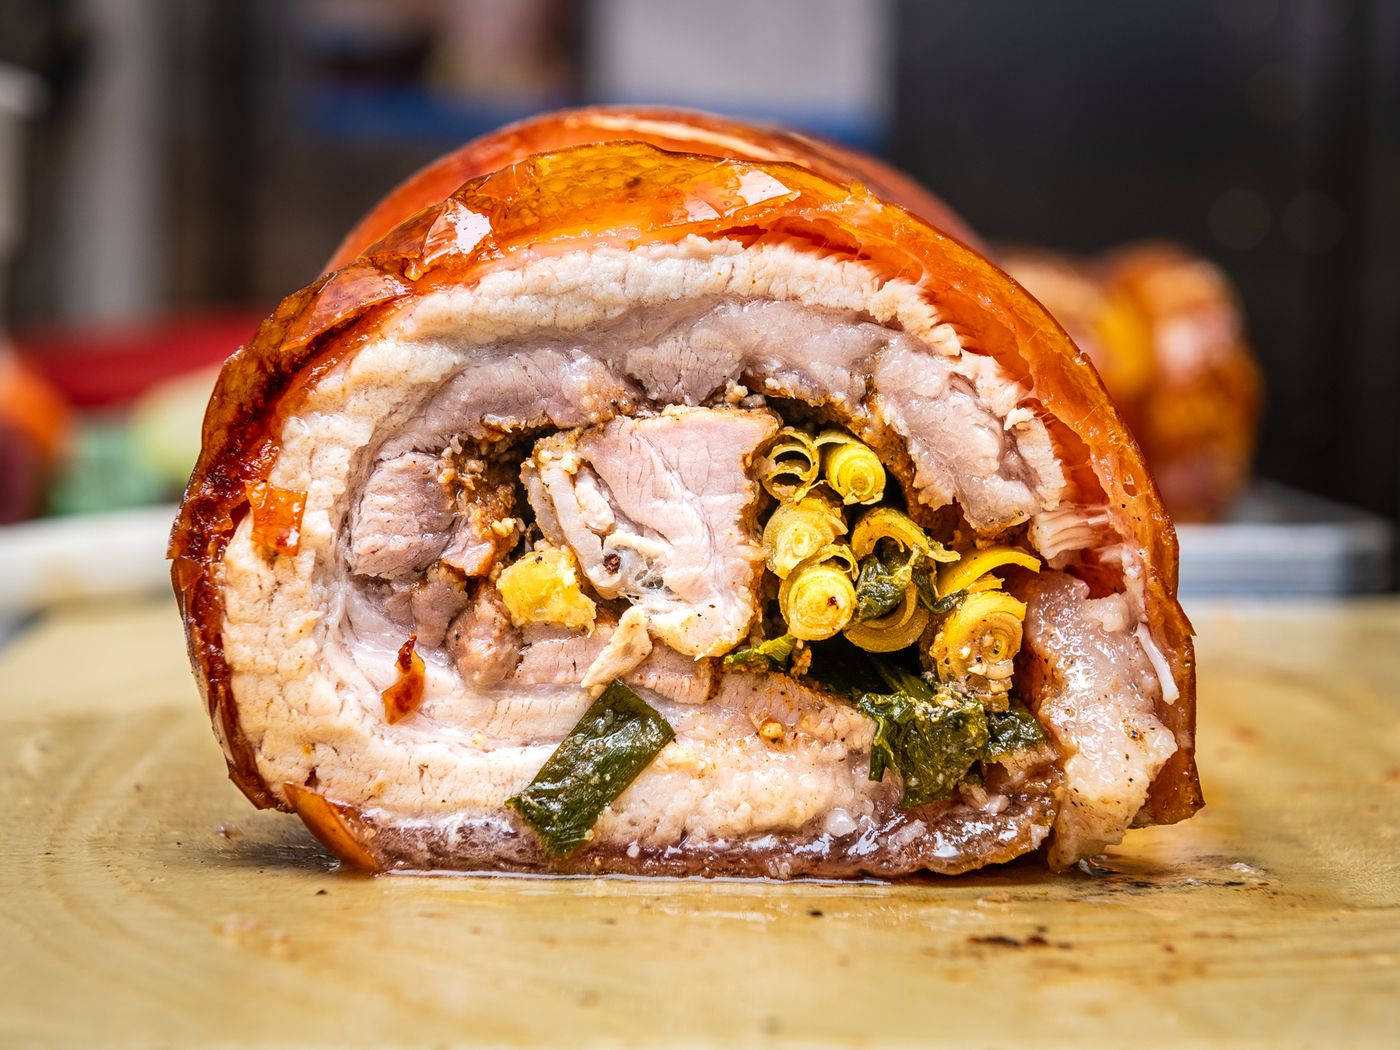 A Delectable Feast - Inside view of Sumptuous Lechon Belly Roll Wallpaper